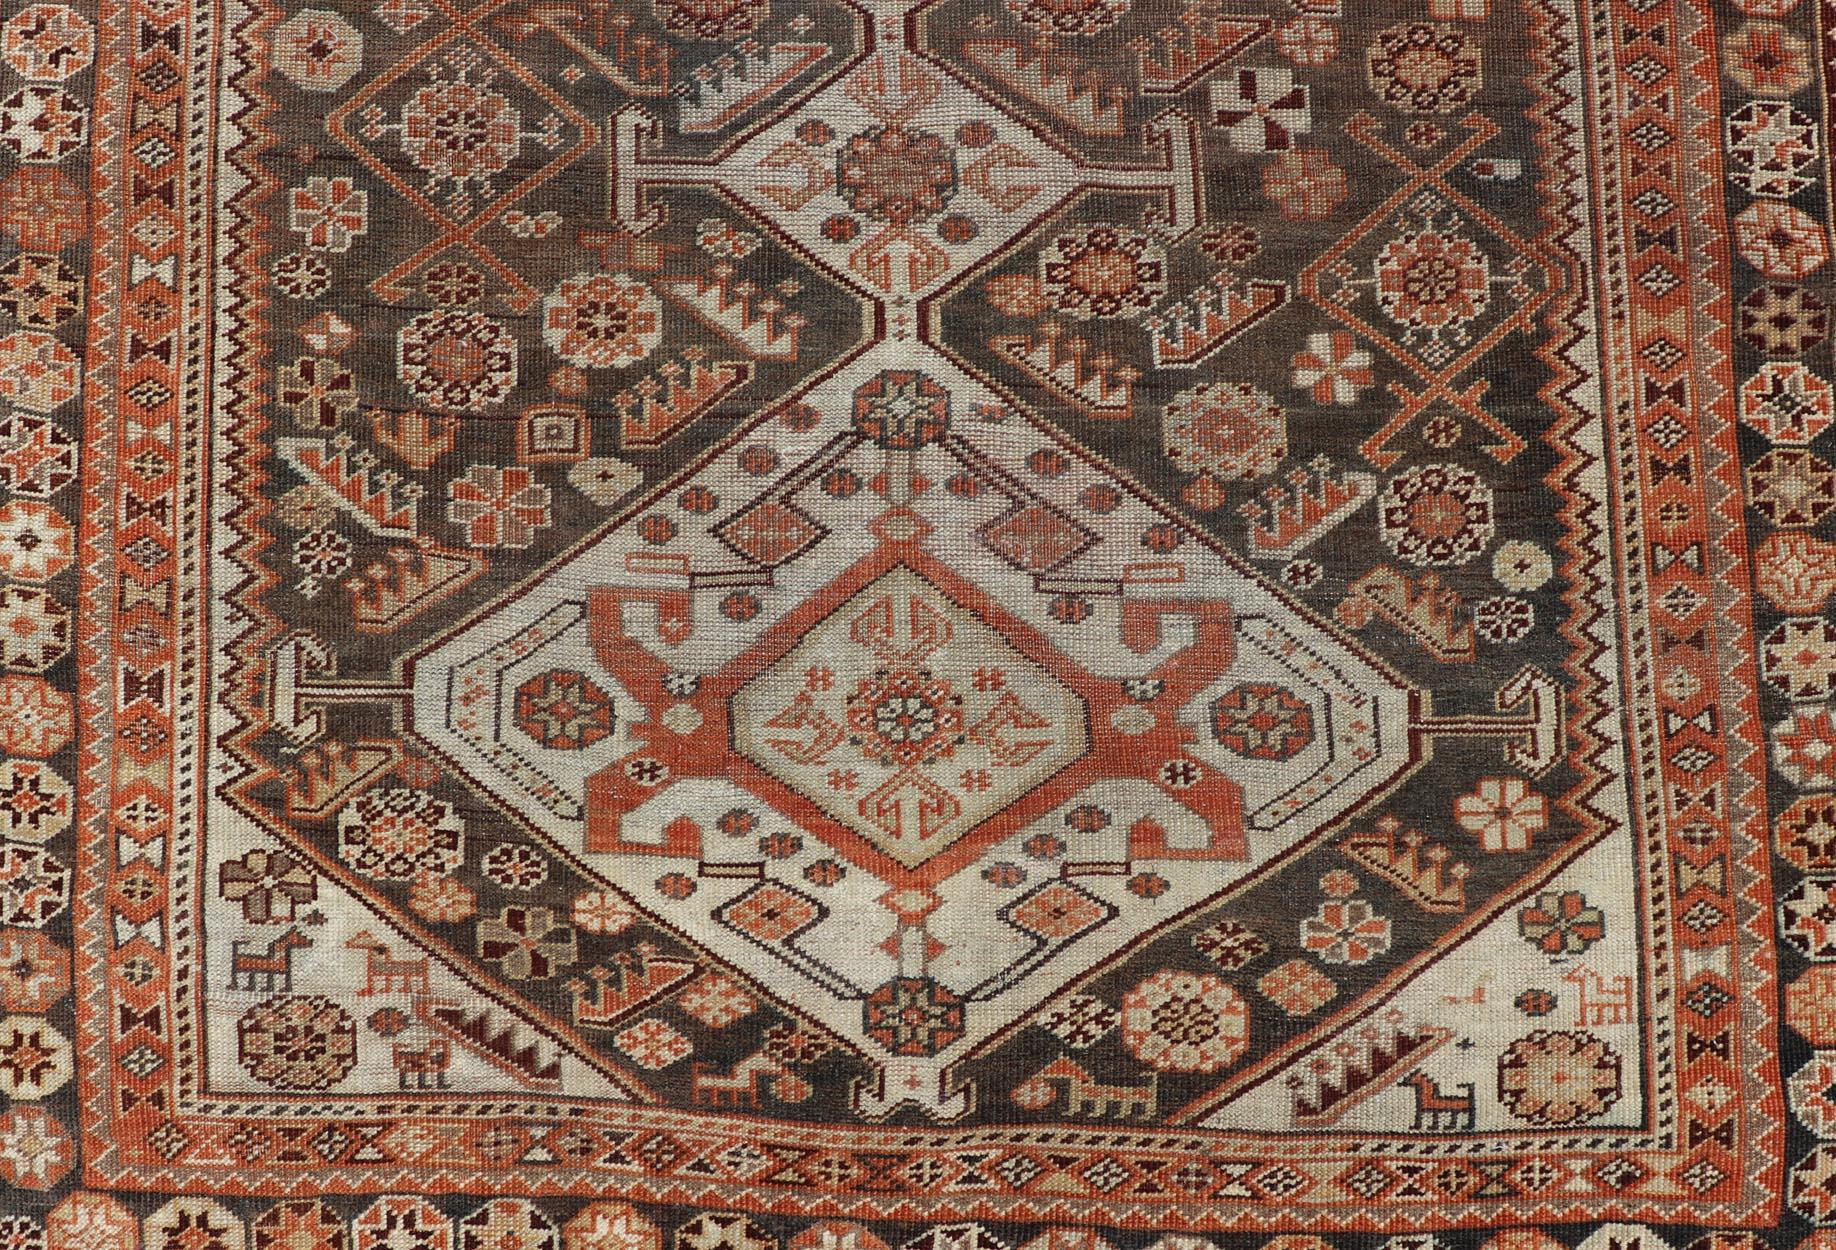 Measures: 3'6 x 6'1.
This antique Persian Shiraz rug has been hand-knotted in wool and features an all-over sub-geometric design rendered in multicolor. A complementary, multi-tiered border encompasses the entirety of the piece; making it a